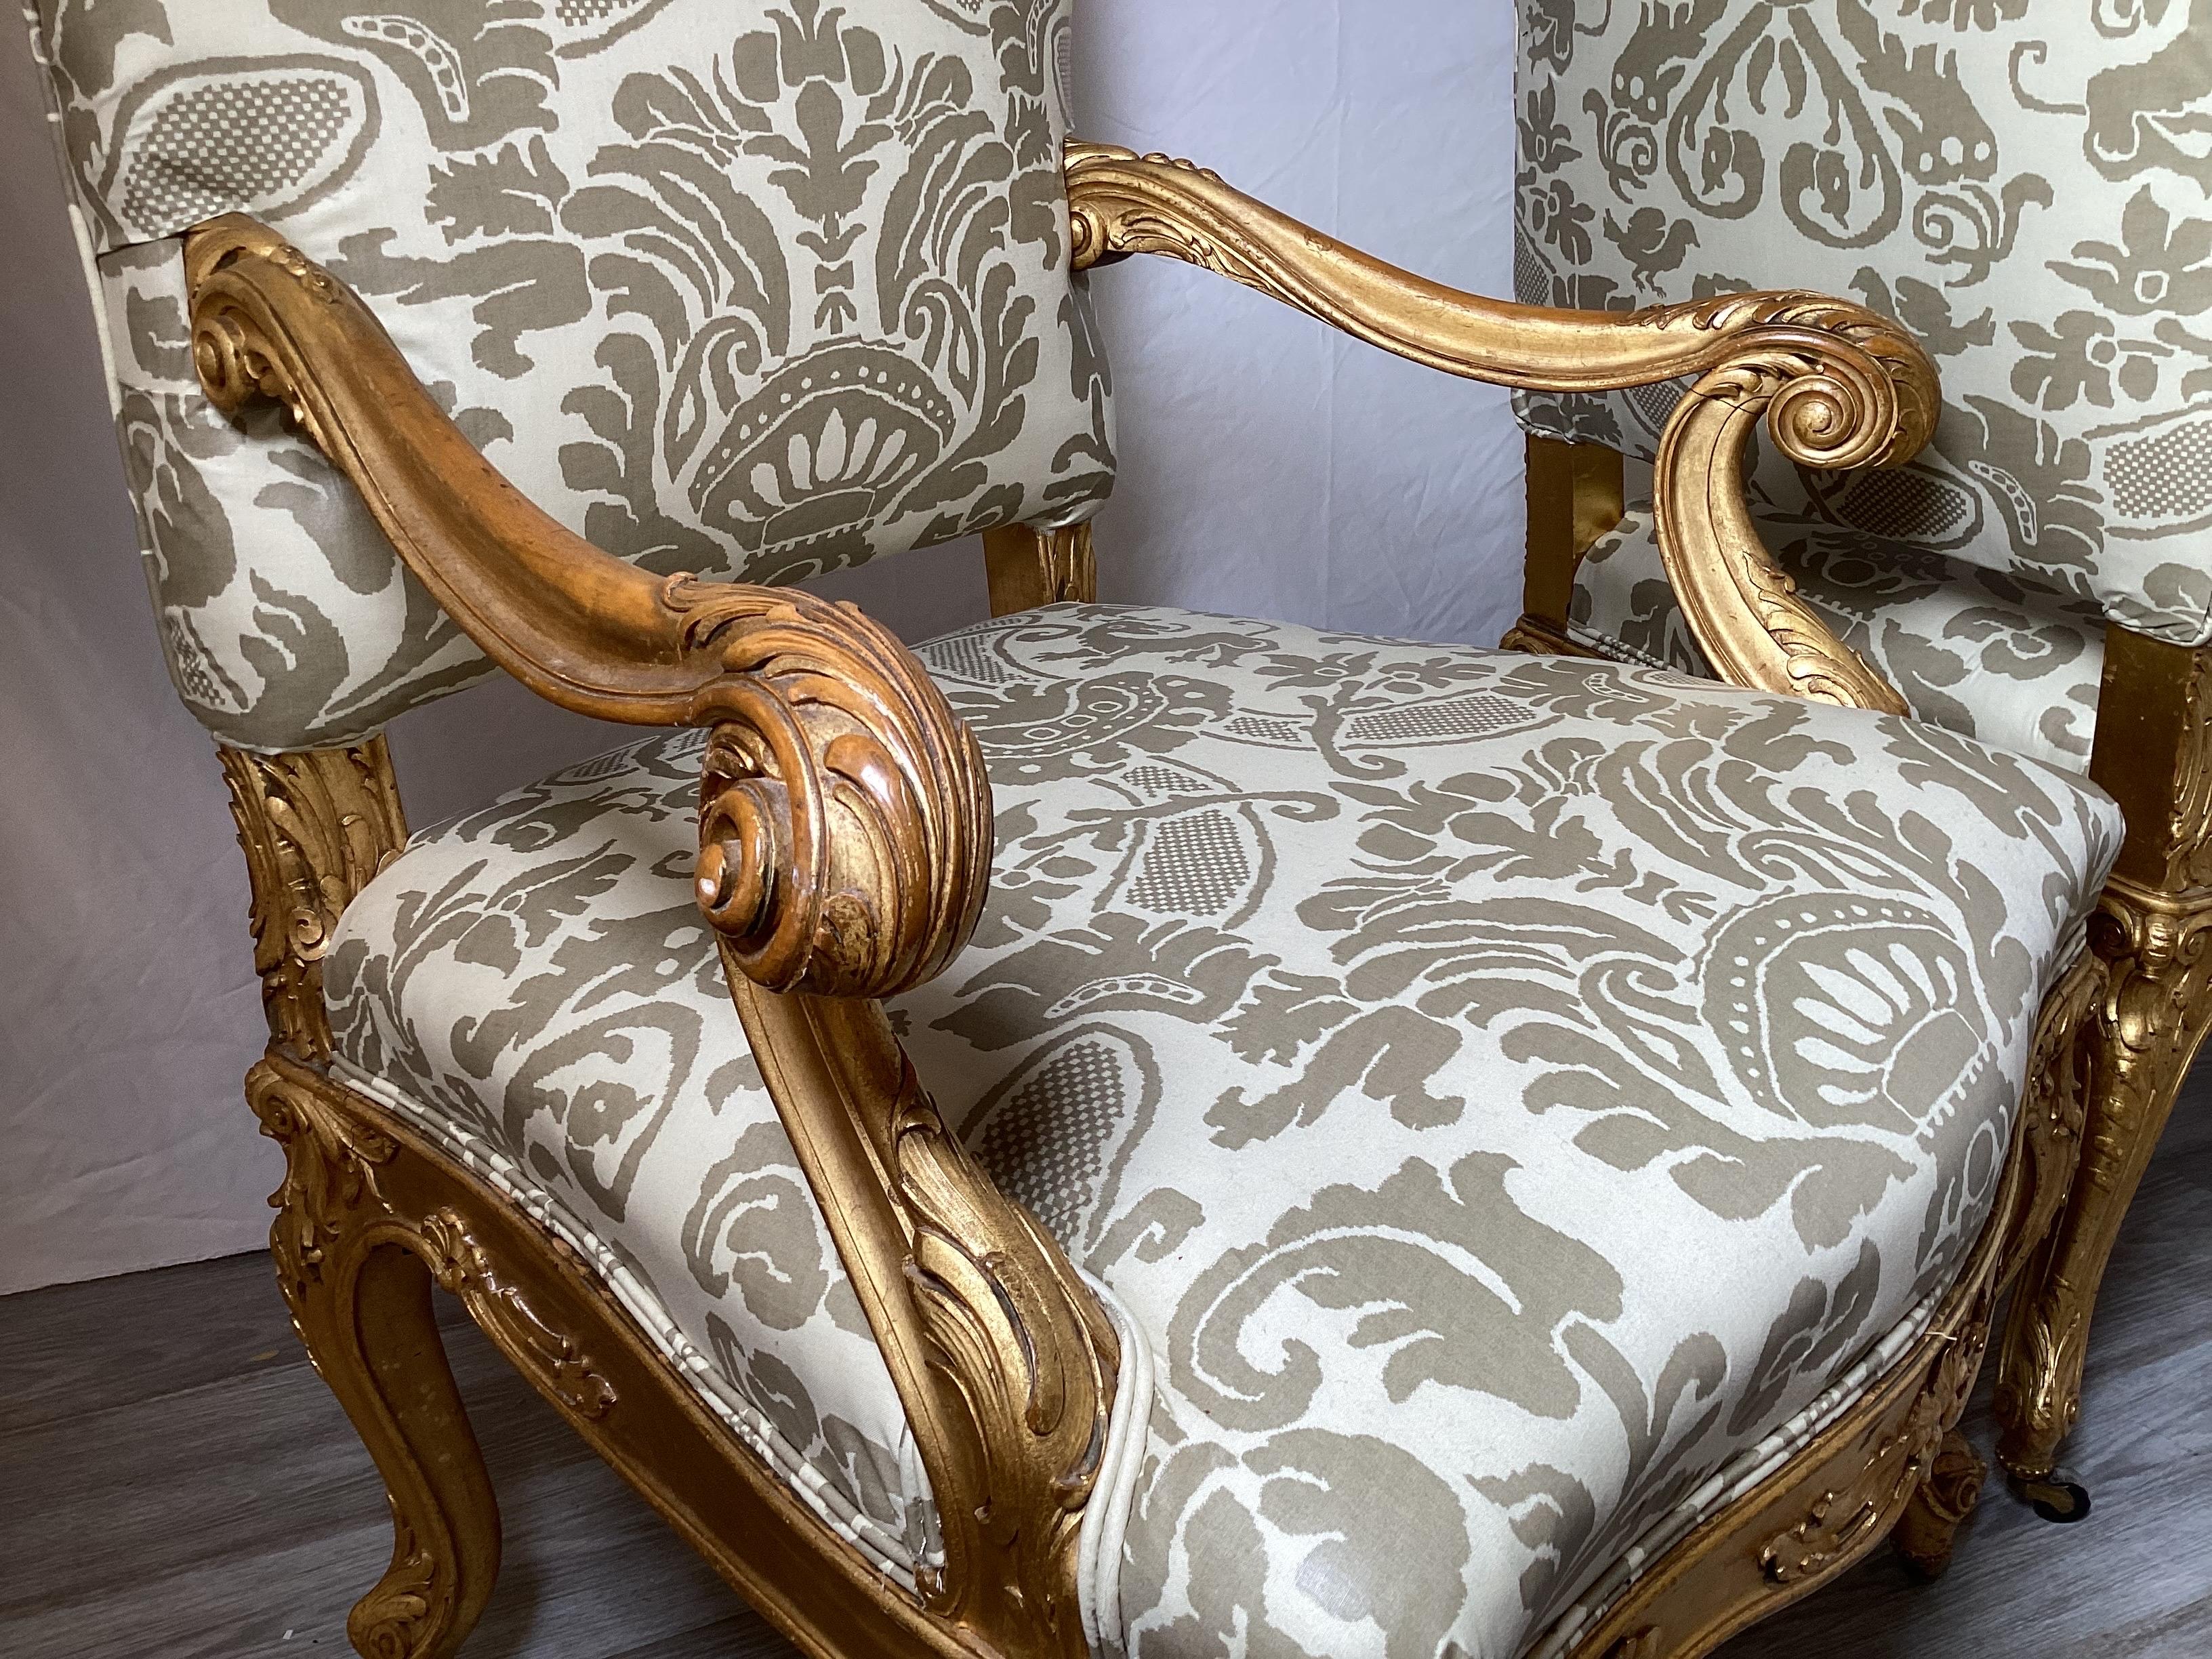 Late 19th Century Pair of 19th Century Giltwood Fauteuils Upholstered Chairs For Sale